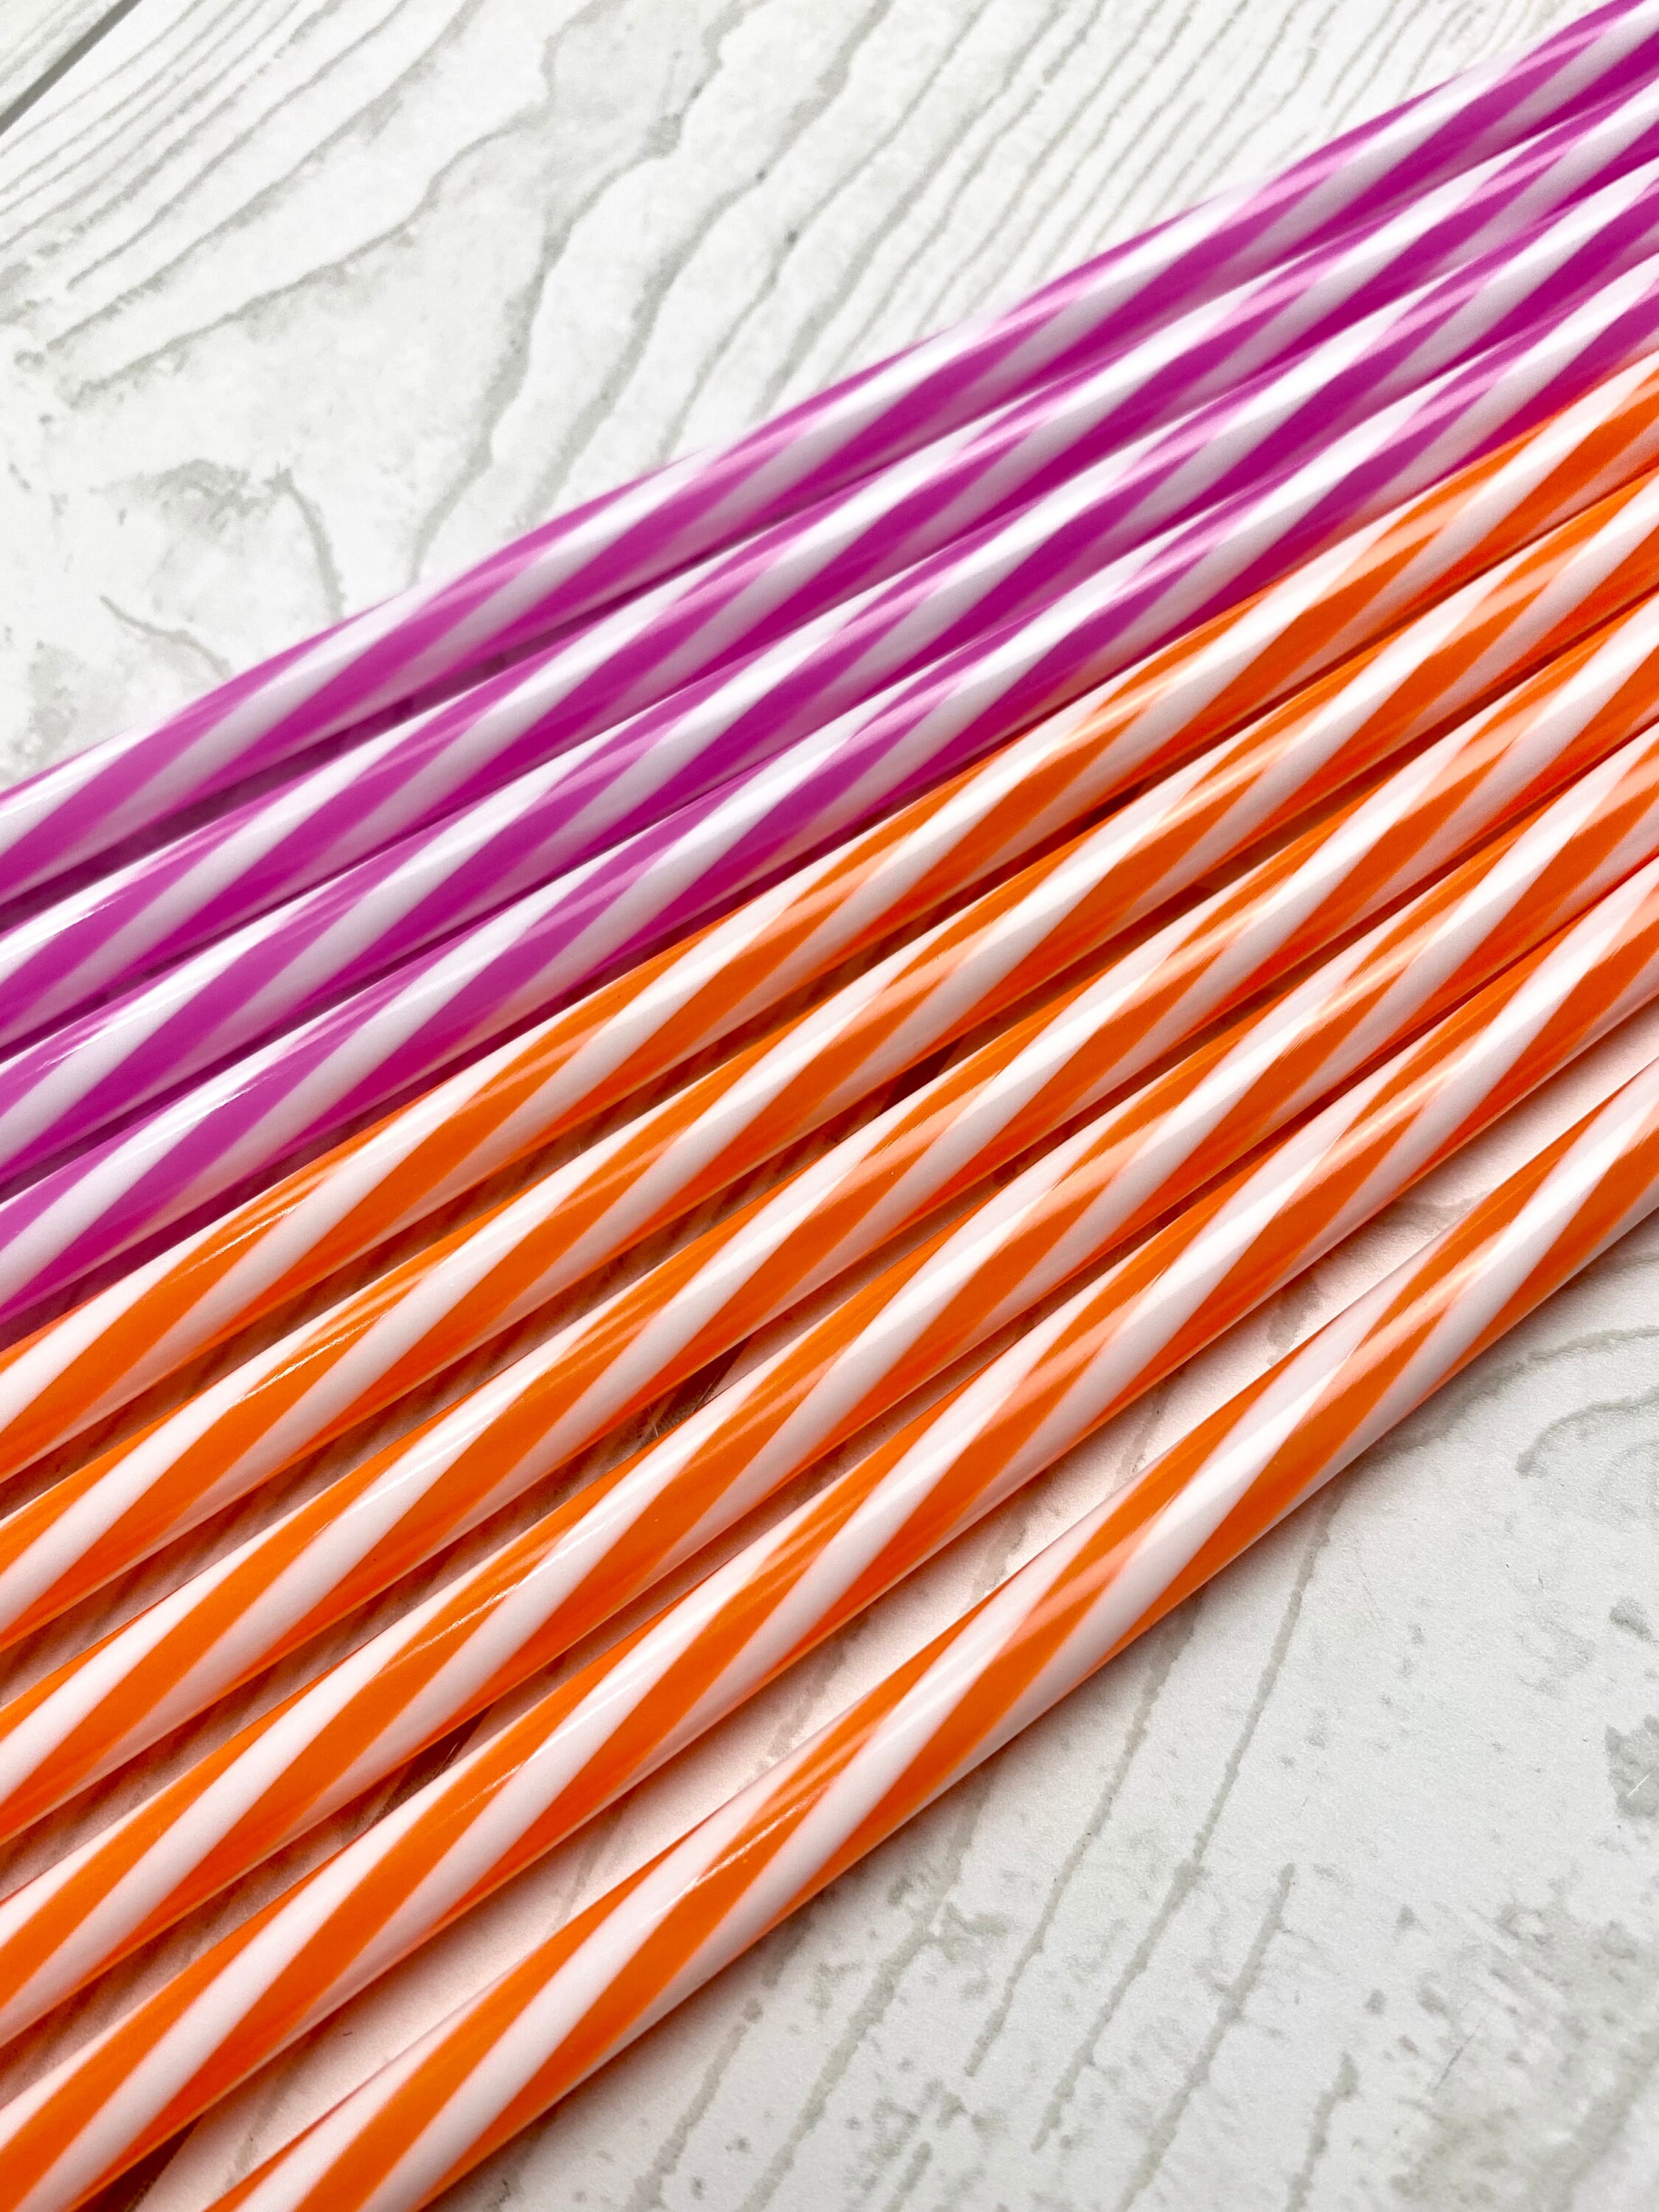 DECEMBER CLEARANCE - 20 Plastic Drinking Straws - Assorted Colors - Party -  Entertaining - H5